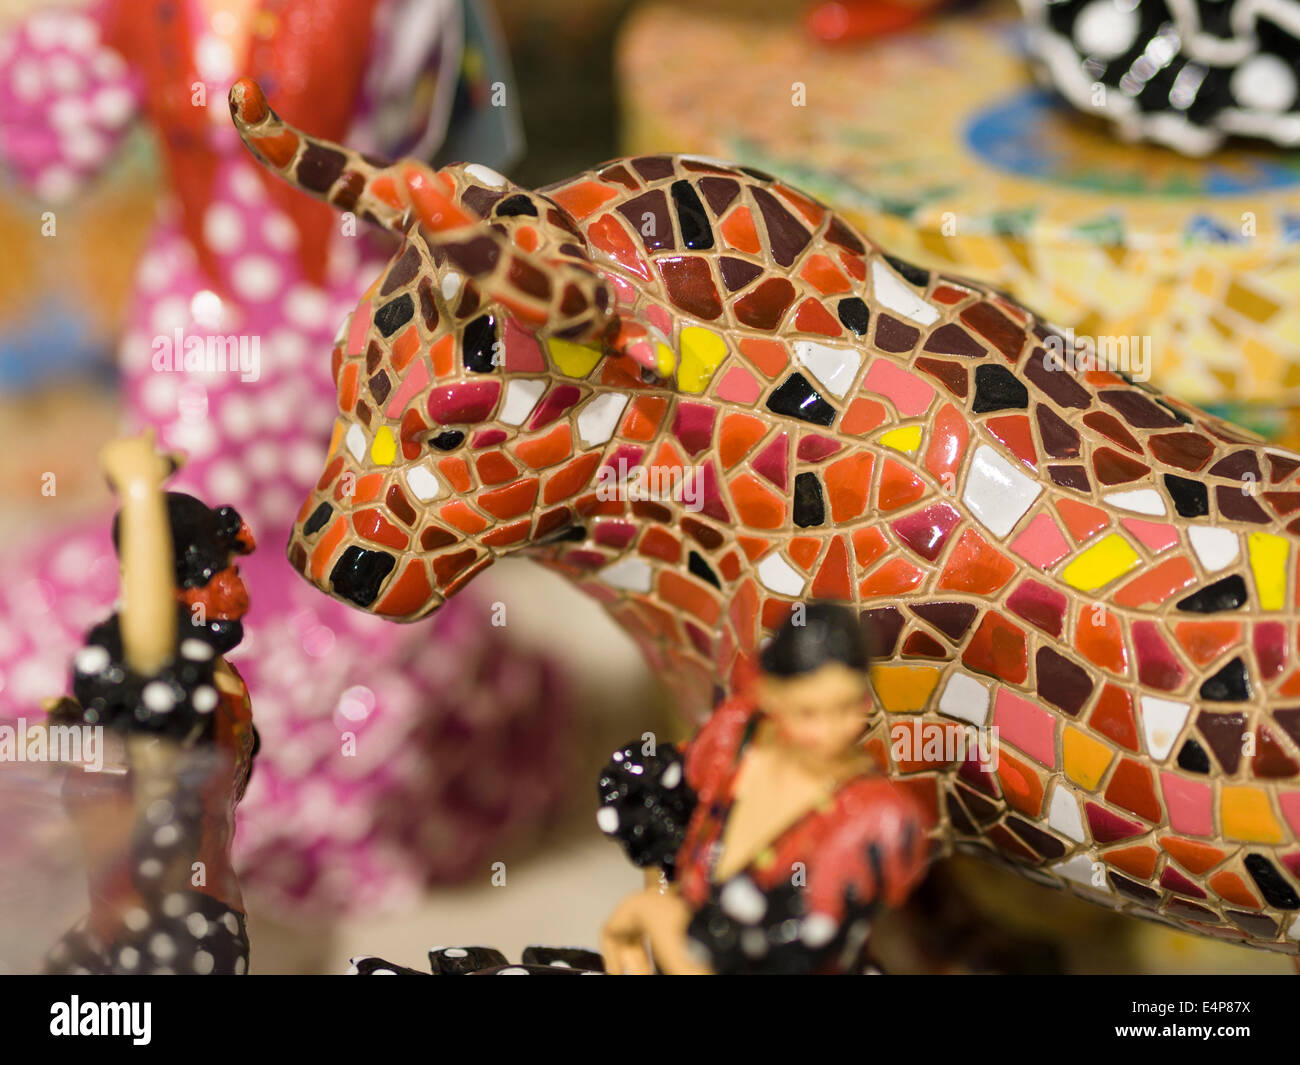 Ceramic Bull in a China Shop. A bull created out of small chips of multicoloured ceramic tile Stock Photo